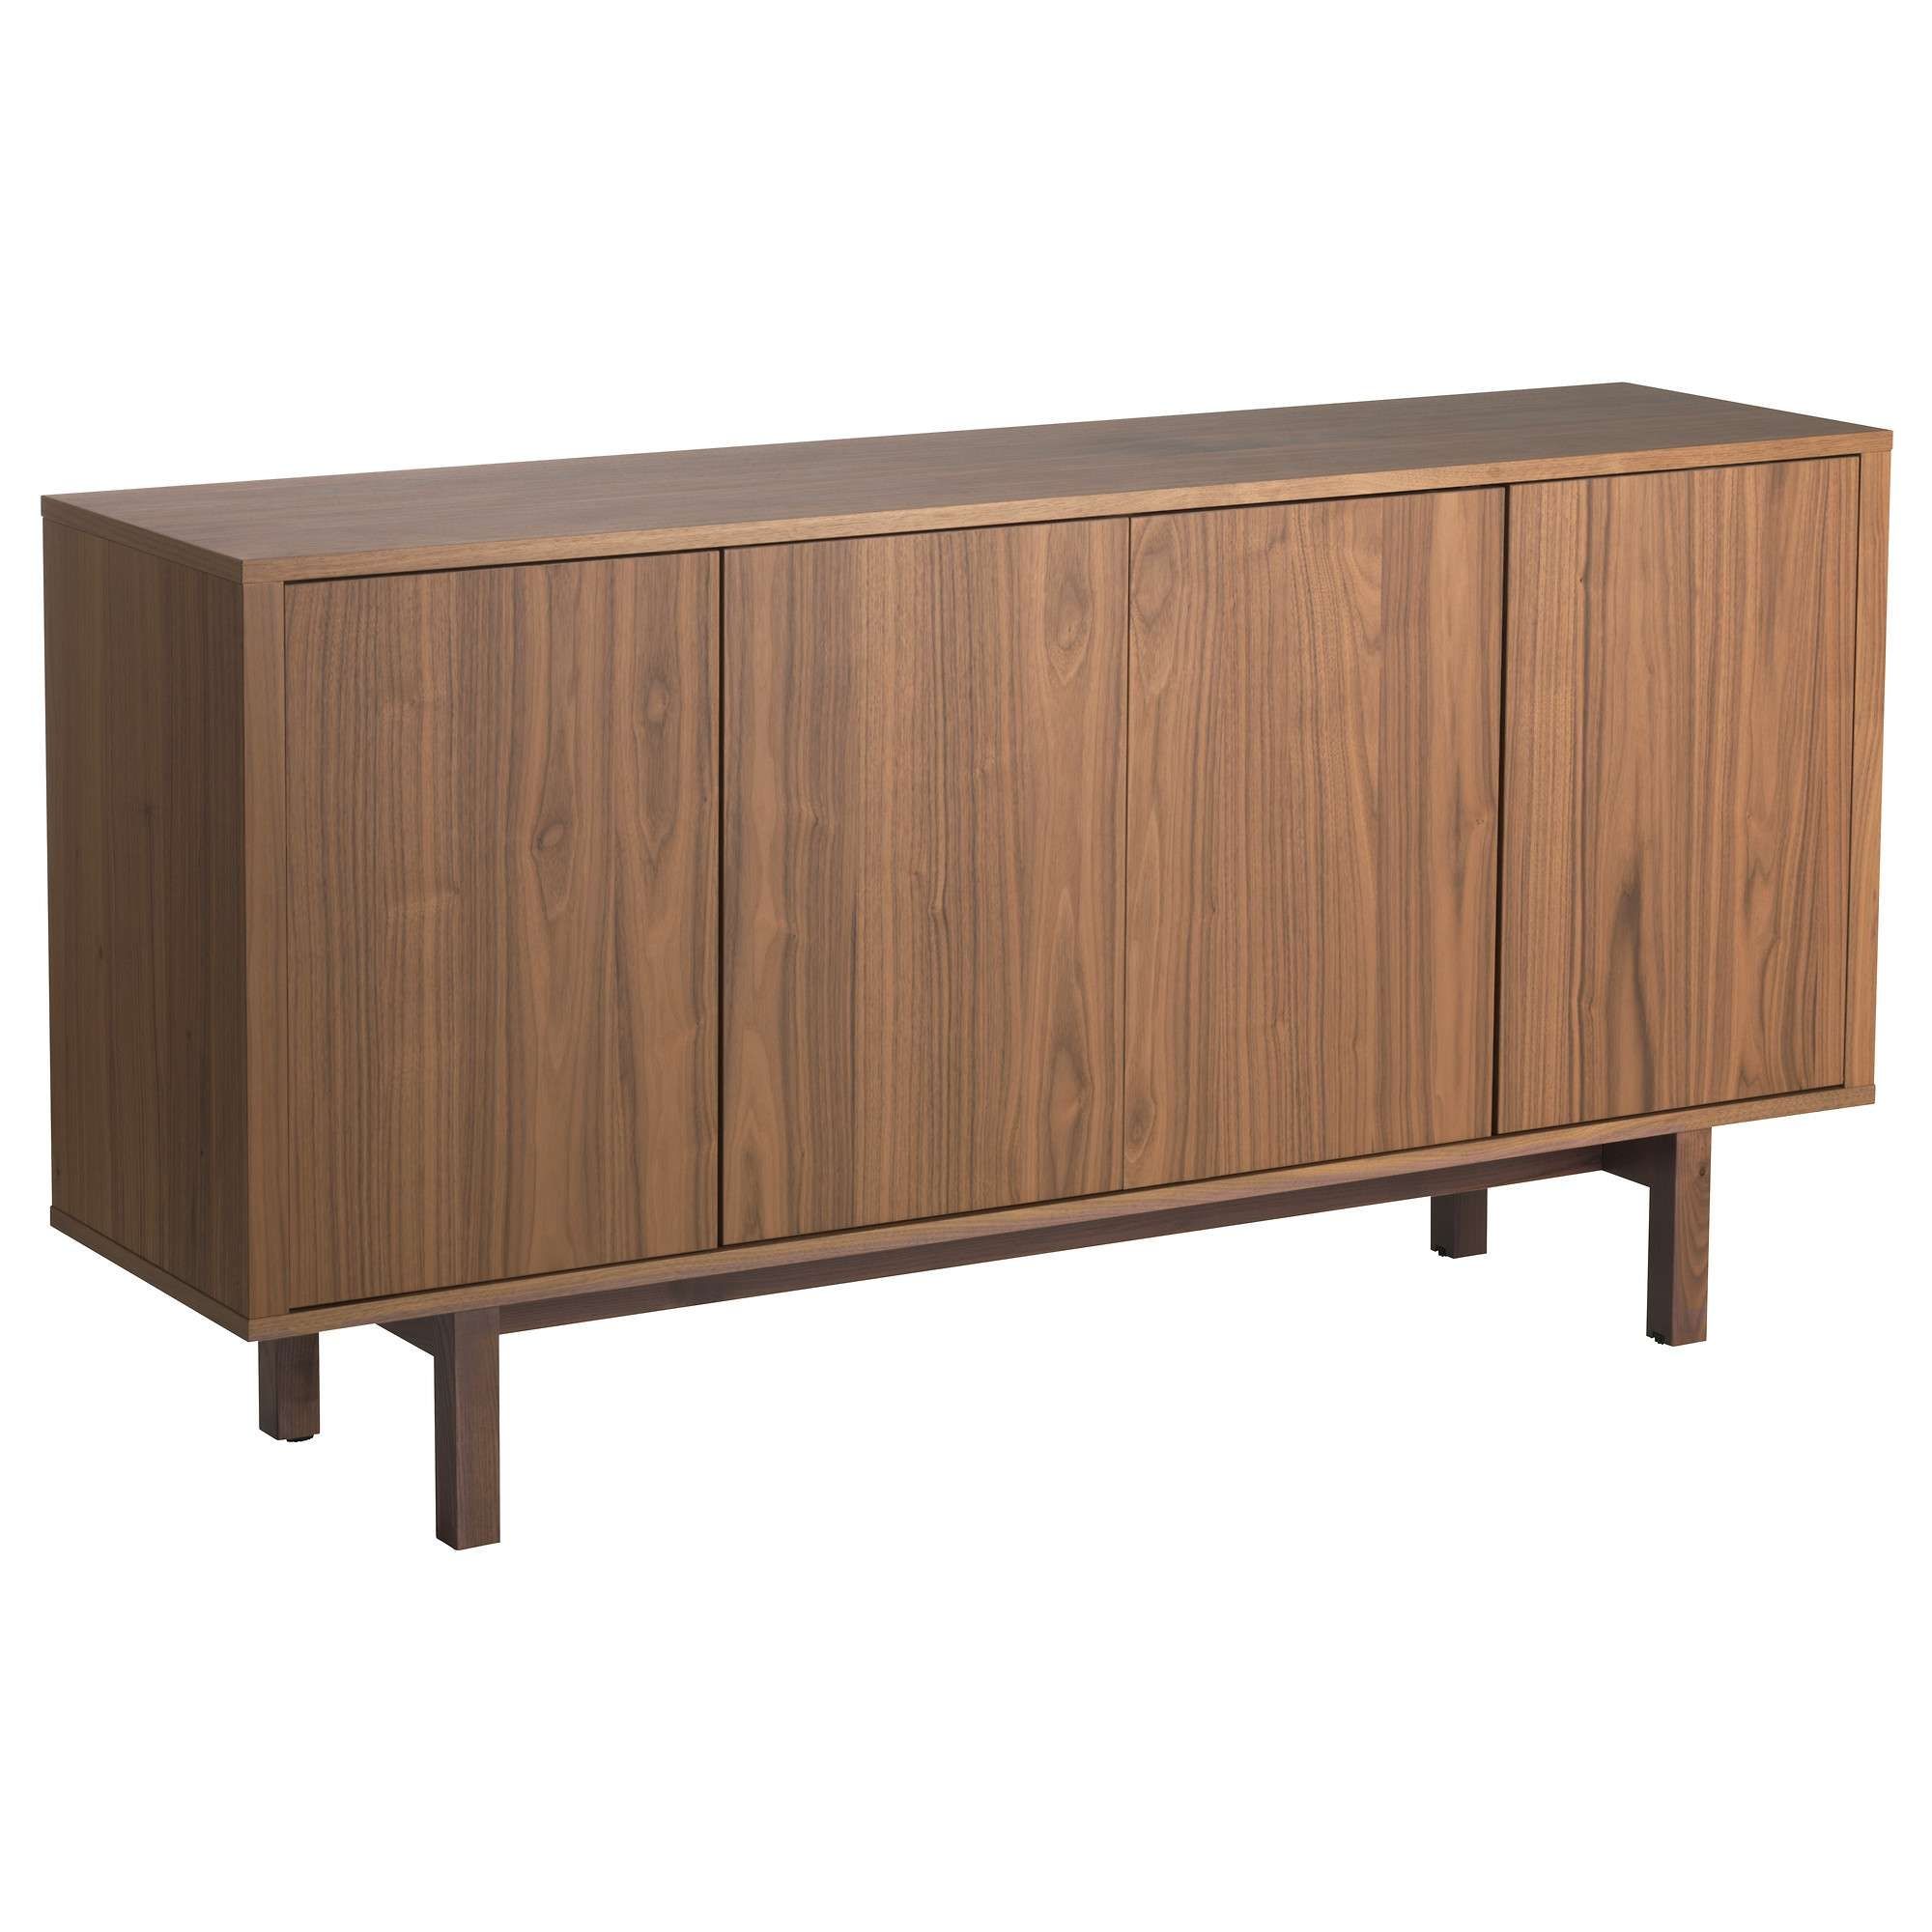 Stockholm Sideboard – Ikea Within Ikea Stockholm Sideboards (View 1 of 20)